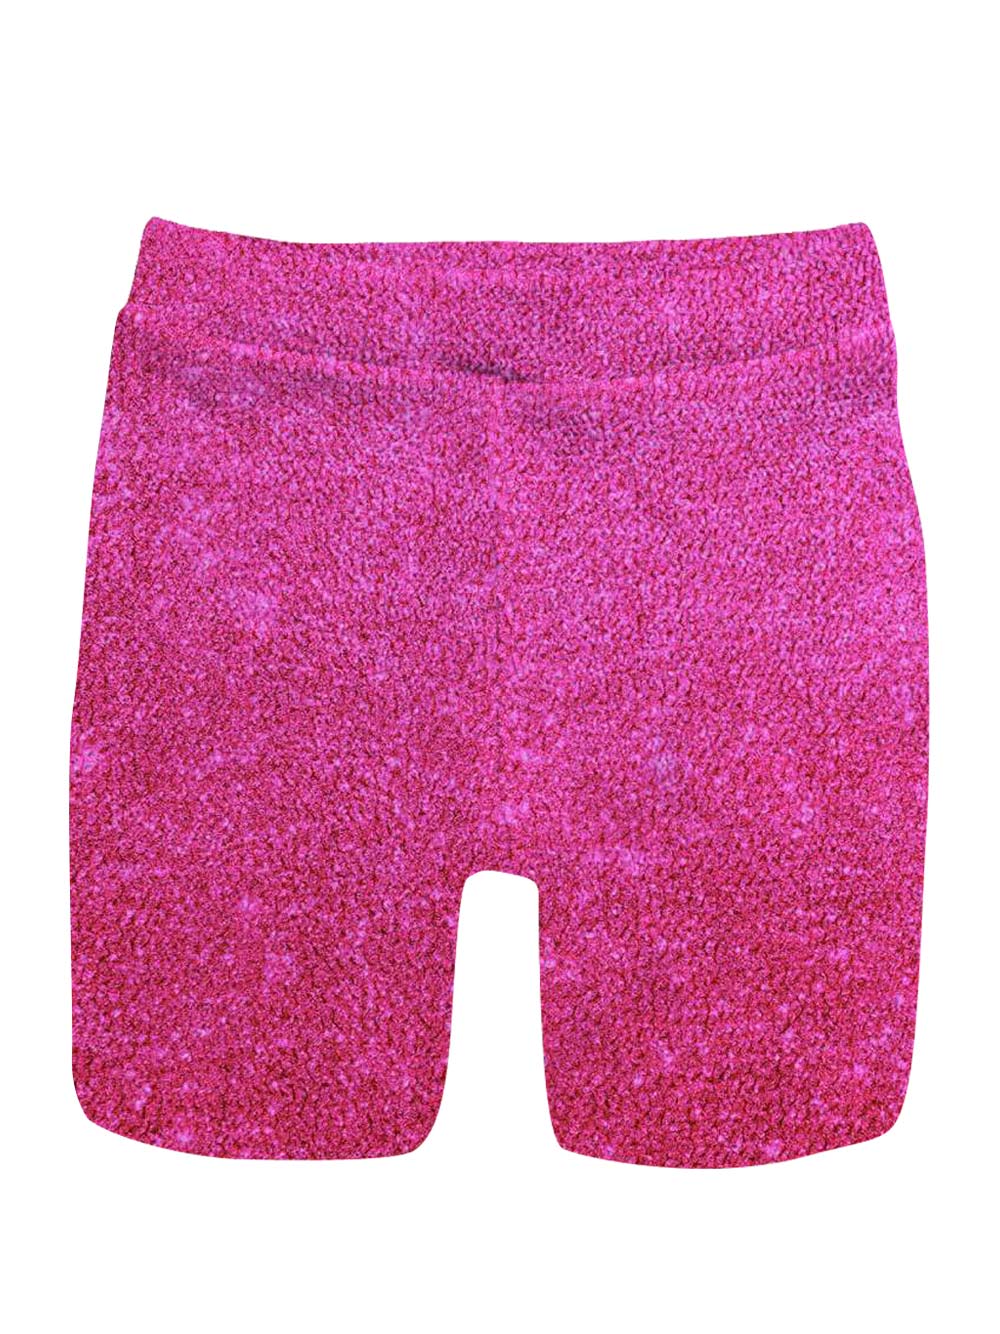 Pink Crinkle Cycling Shorts